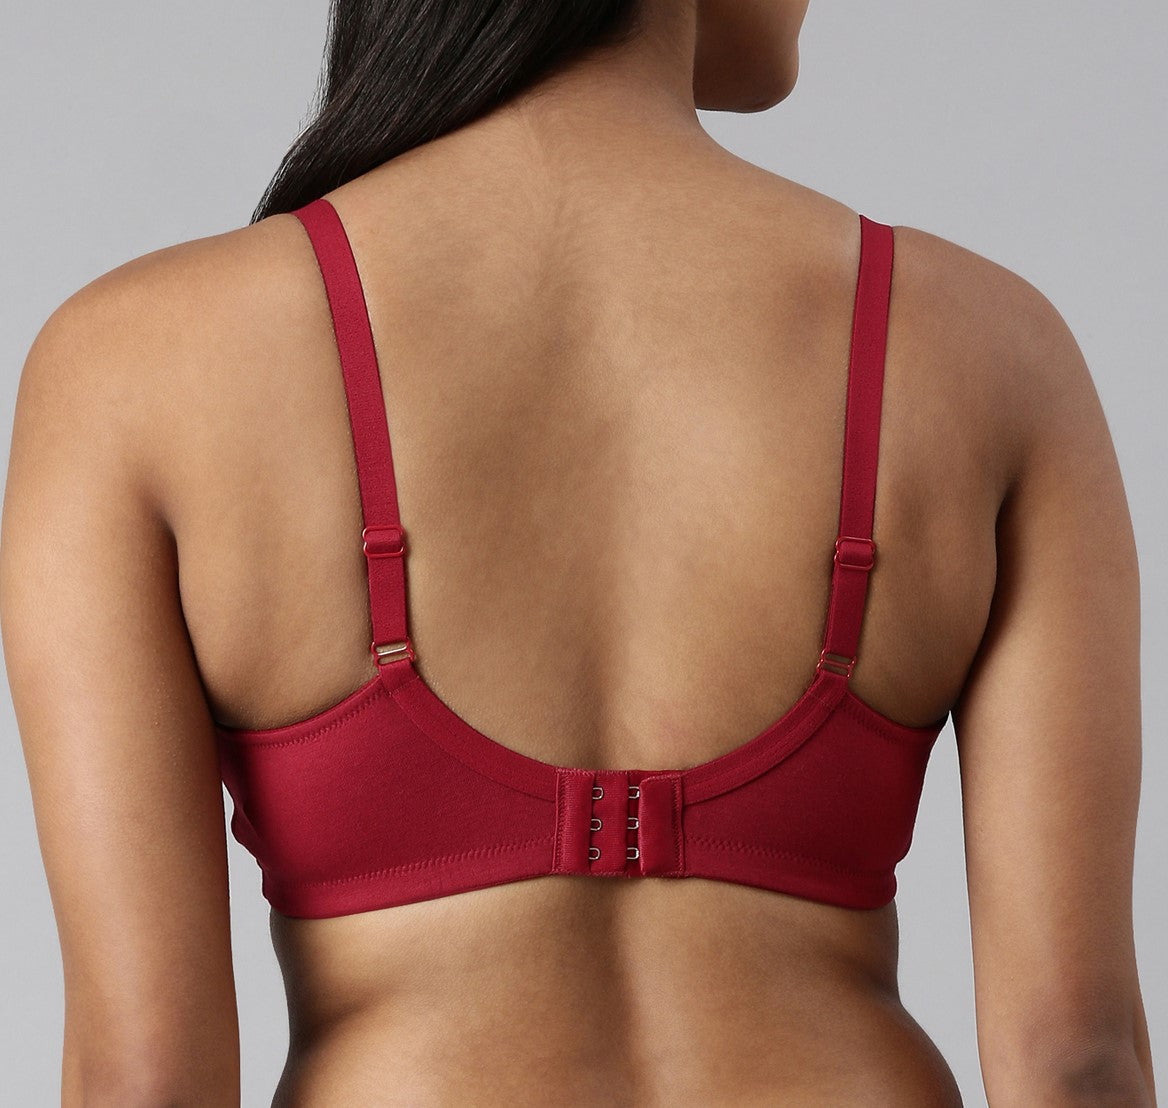 blossom-embrace-red wine5-support bra